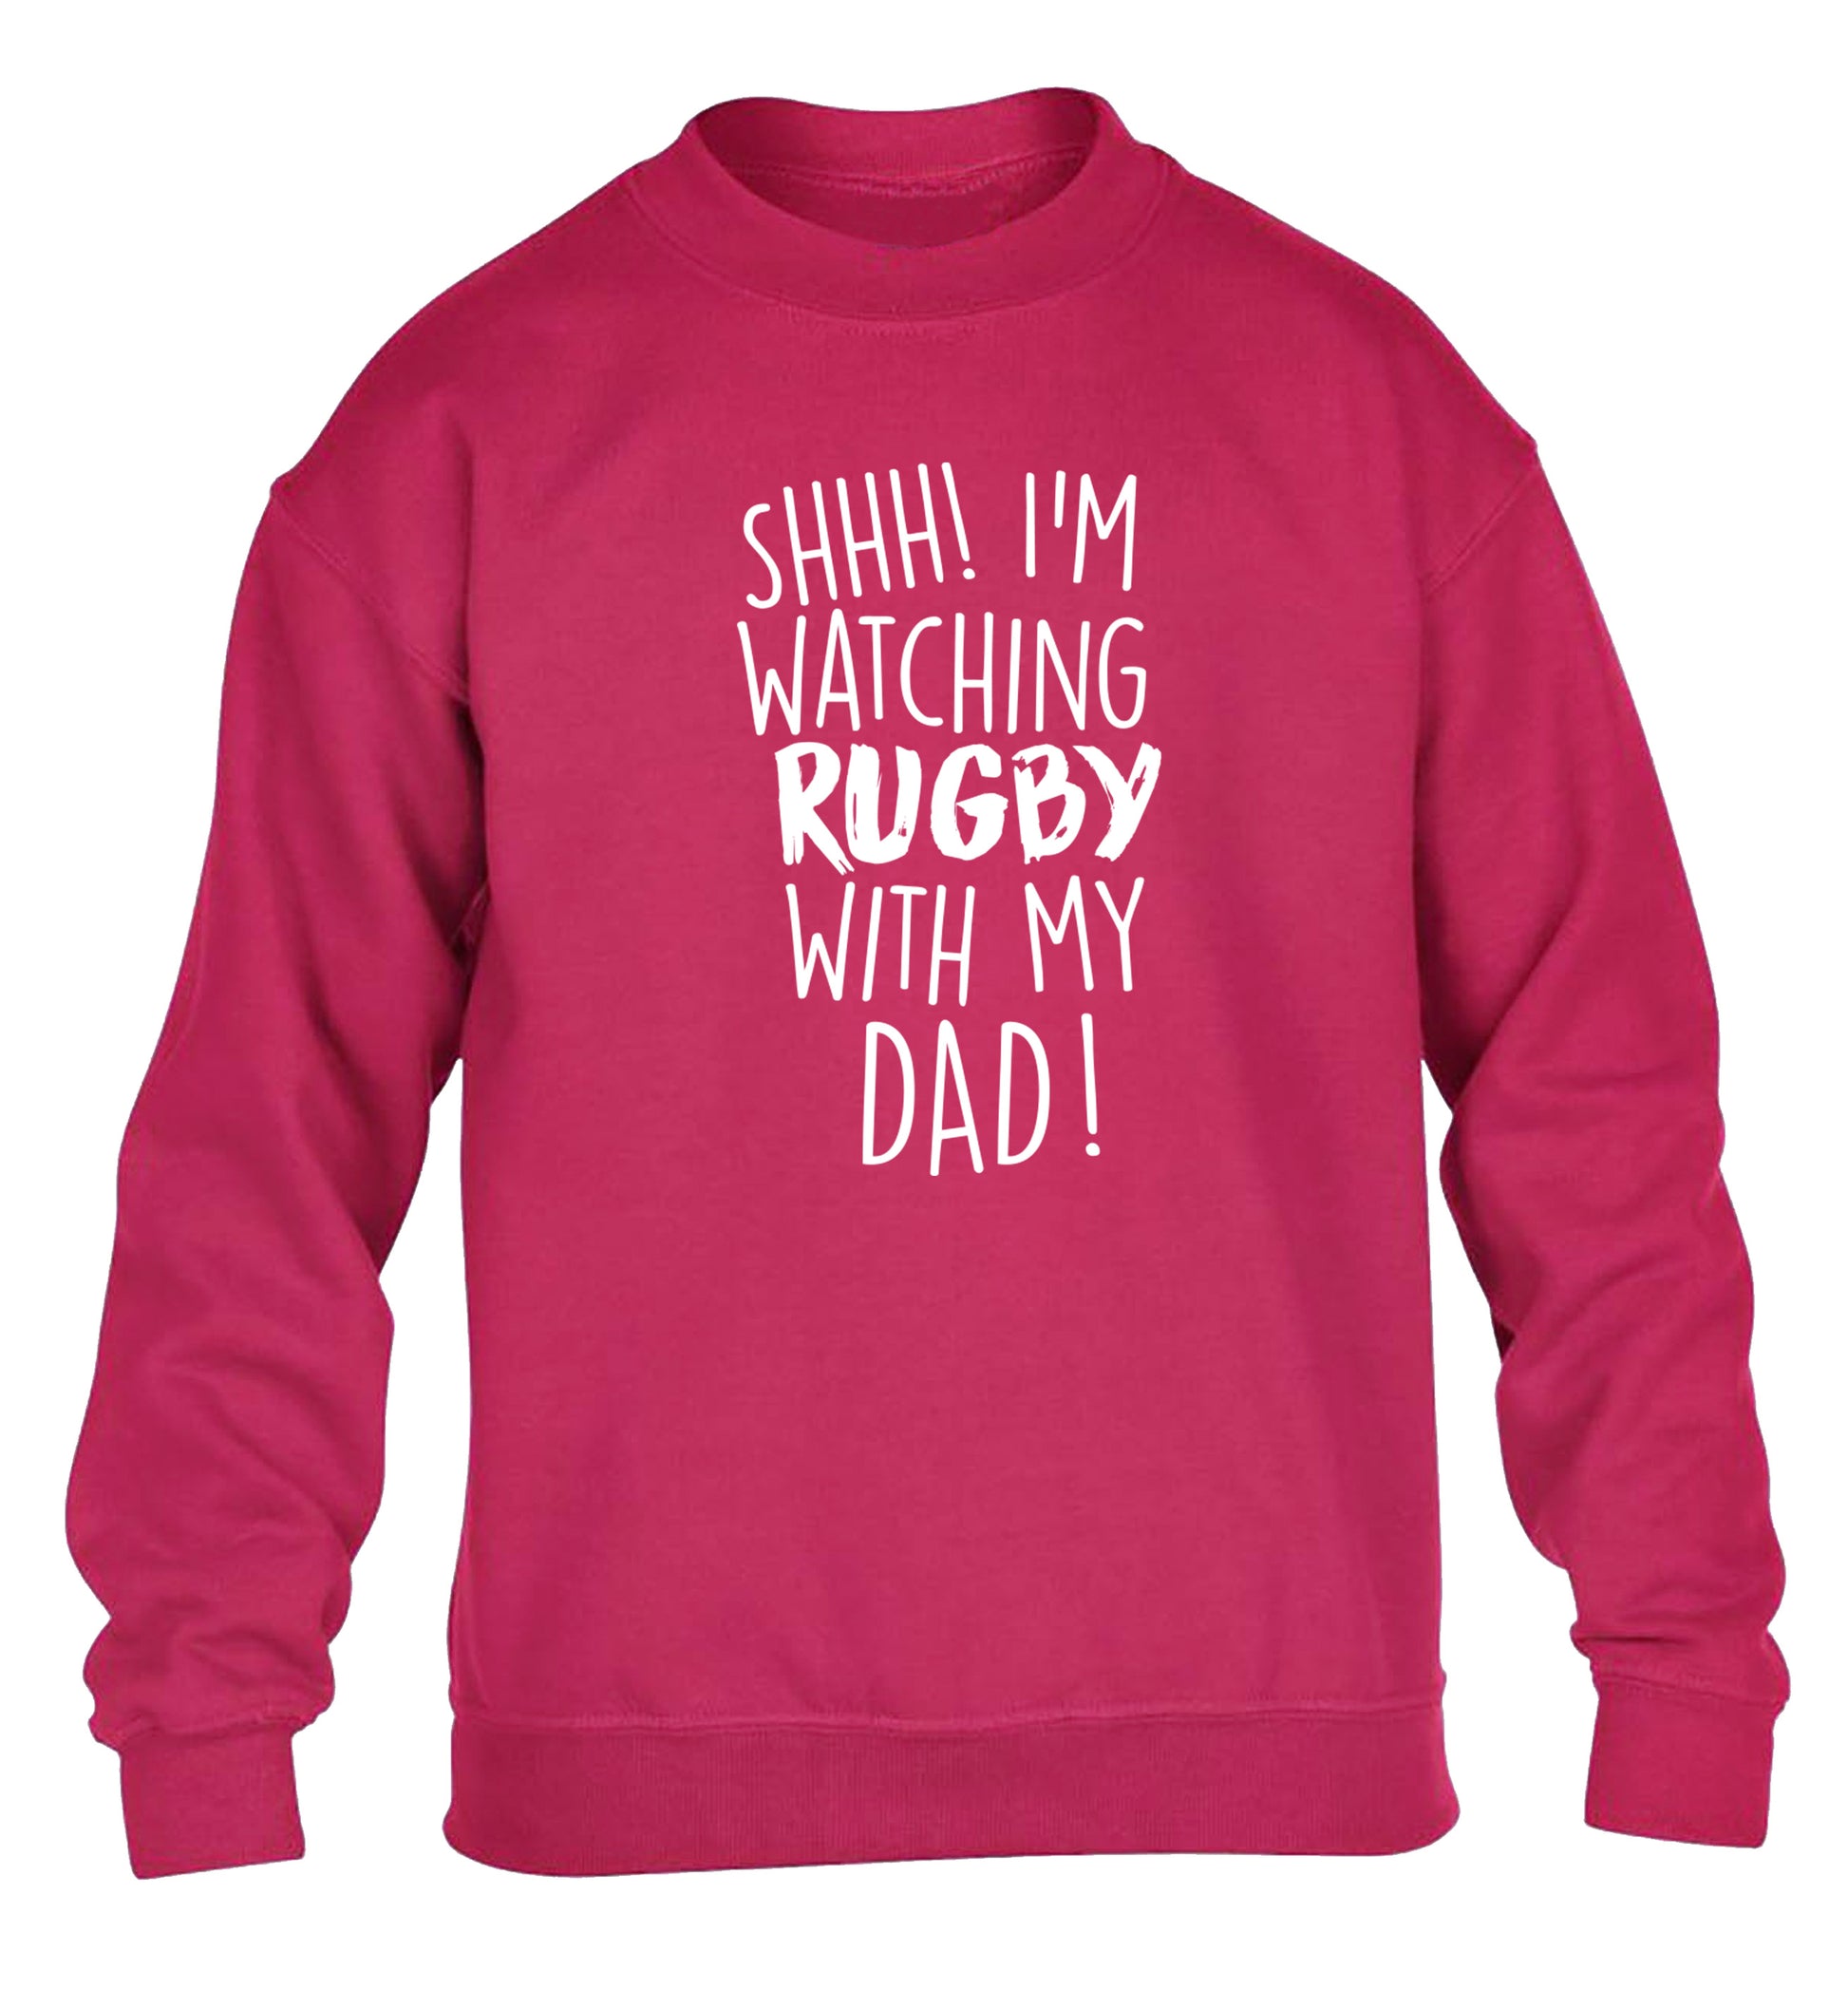 Shh... I'm watching rugby with my dad children's pink sweater 12-13 Years